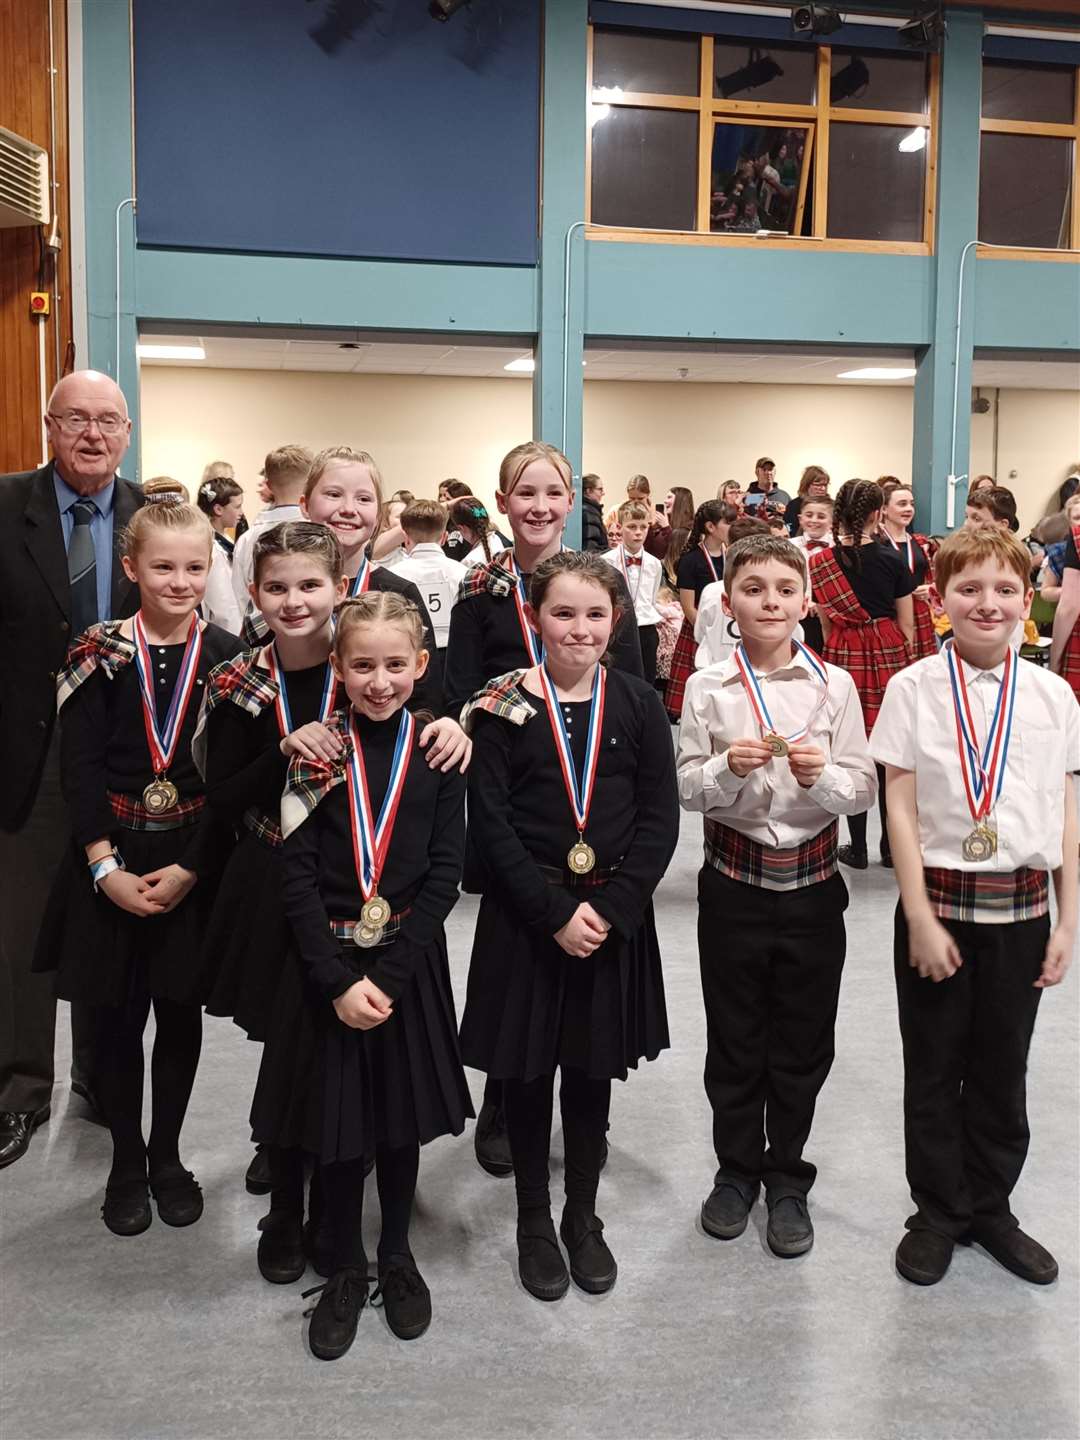 Brora Primary School came first equal in Strip the Willow with Rosehall.